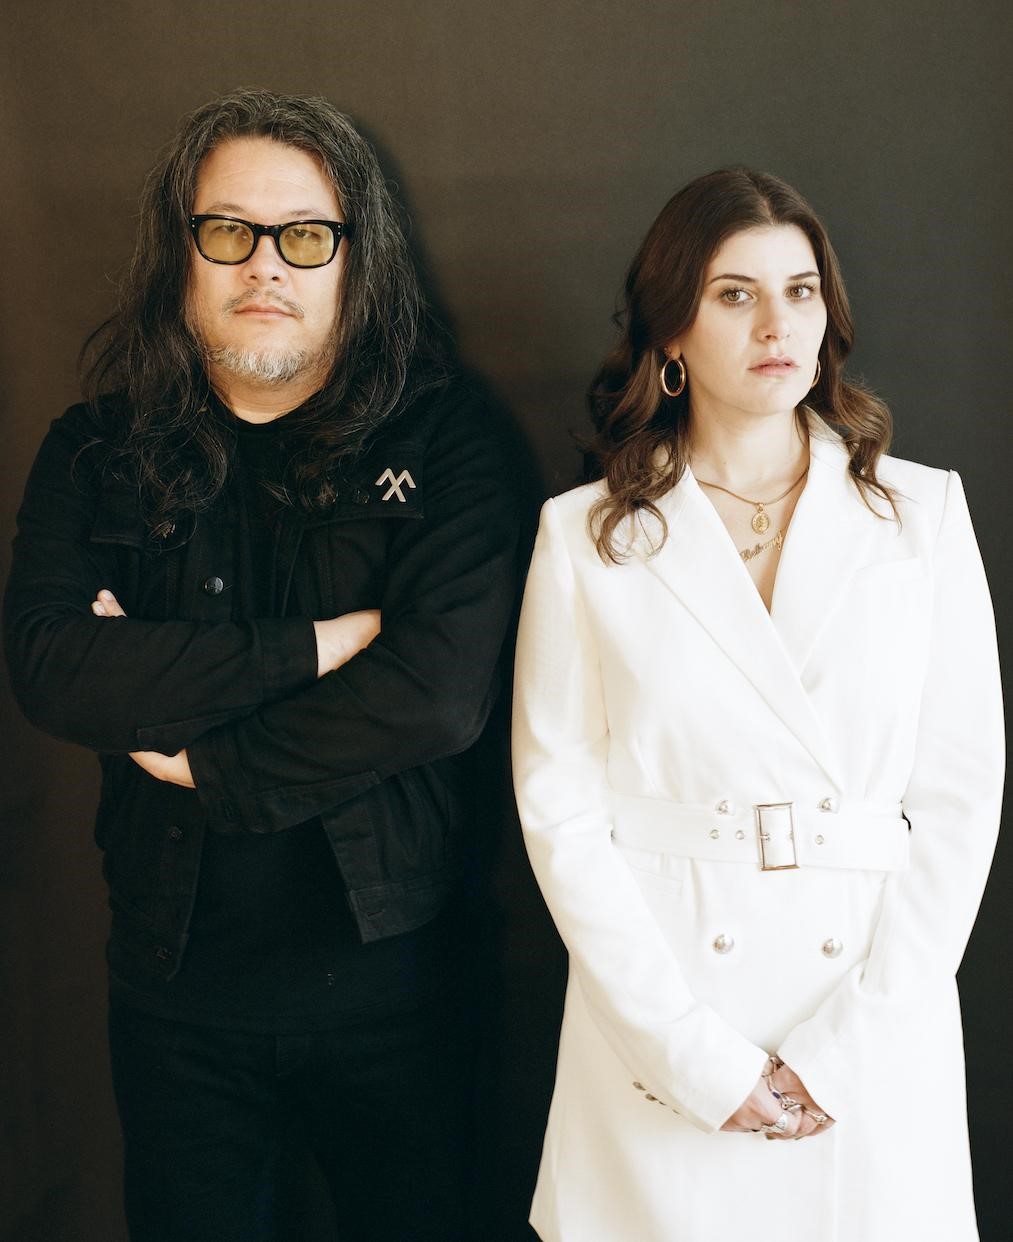 BEST COAST  RELEASE NEW SINGLE “DIFFERENT LIGHT”  TAKEN FROM THE NEW ALBUM “ALWAYS TOMORROW”